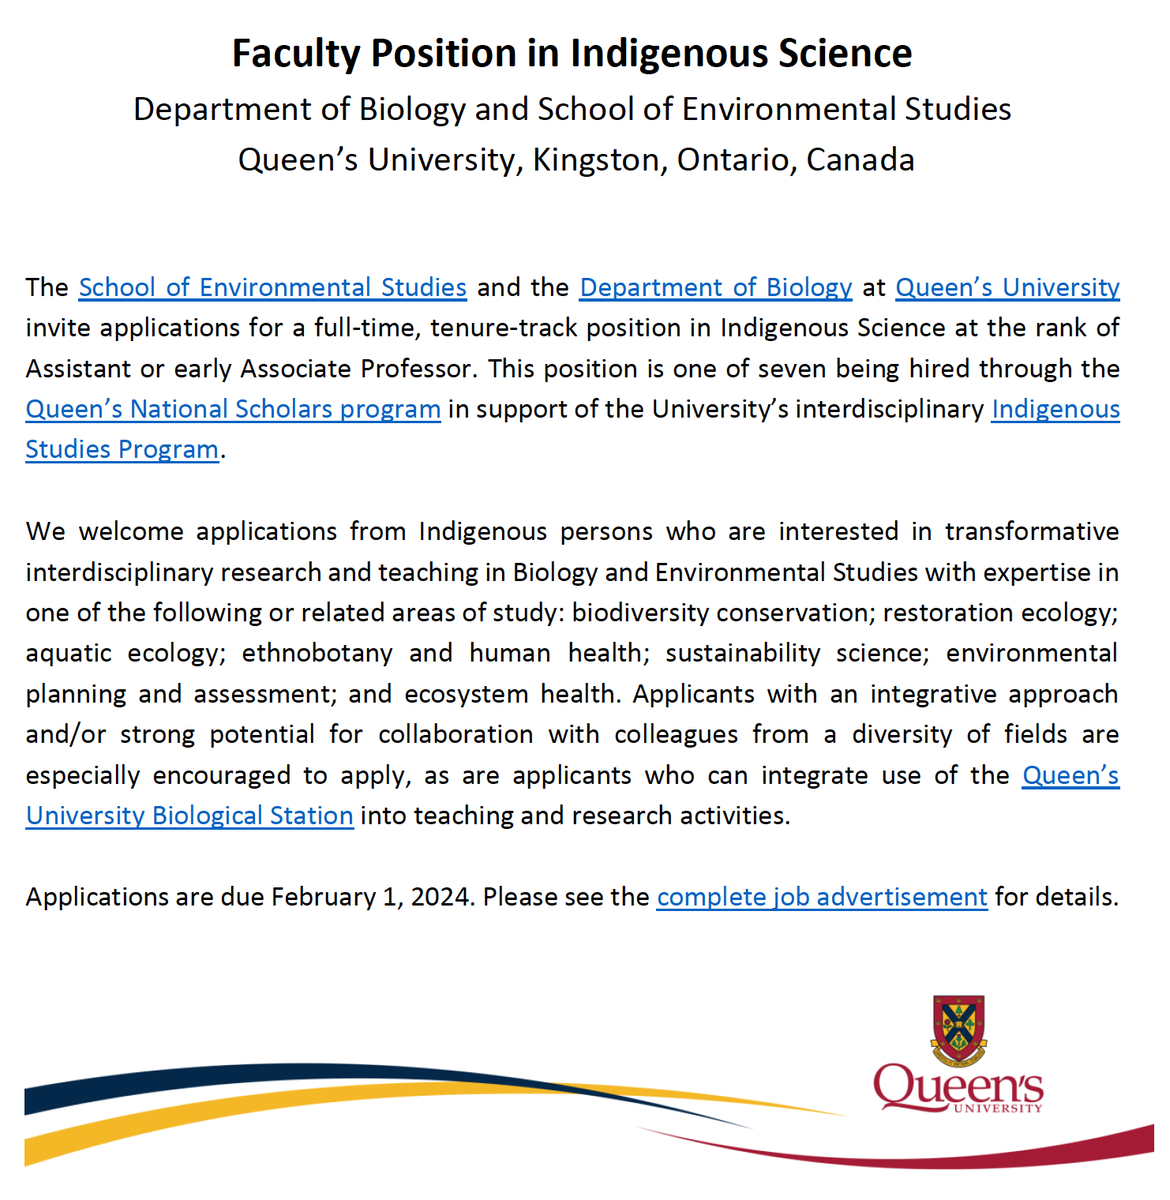 We are excited to be hiring for this faculty position with @QueensUBio and @QUBioStation! Complete ad available at queensu.ca/ensc/employmen…